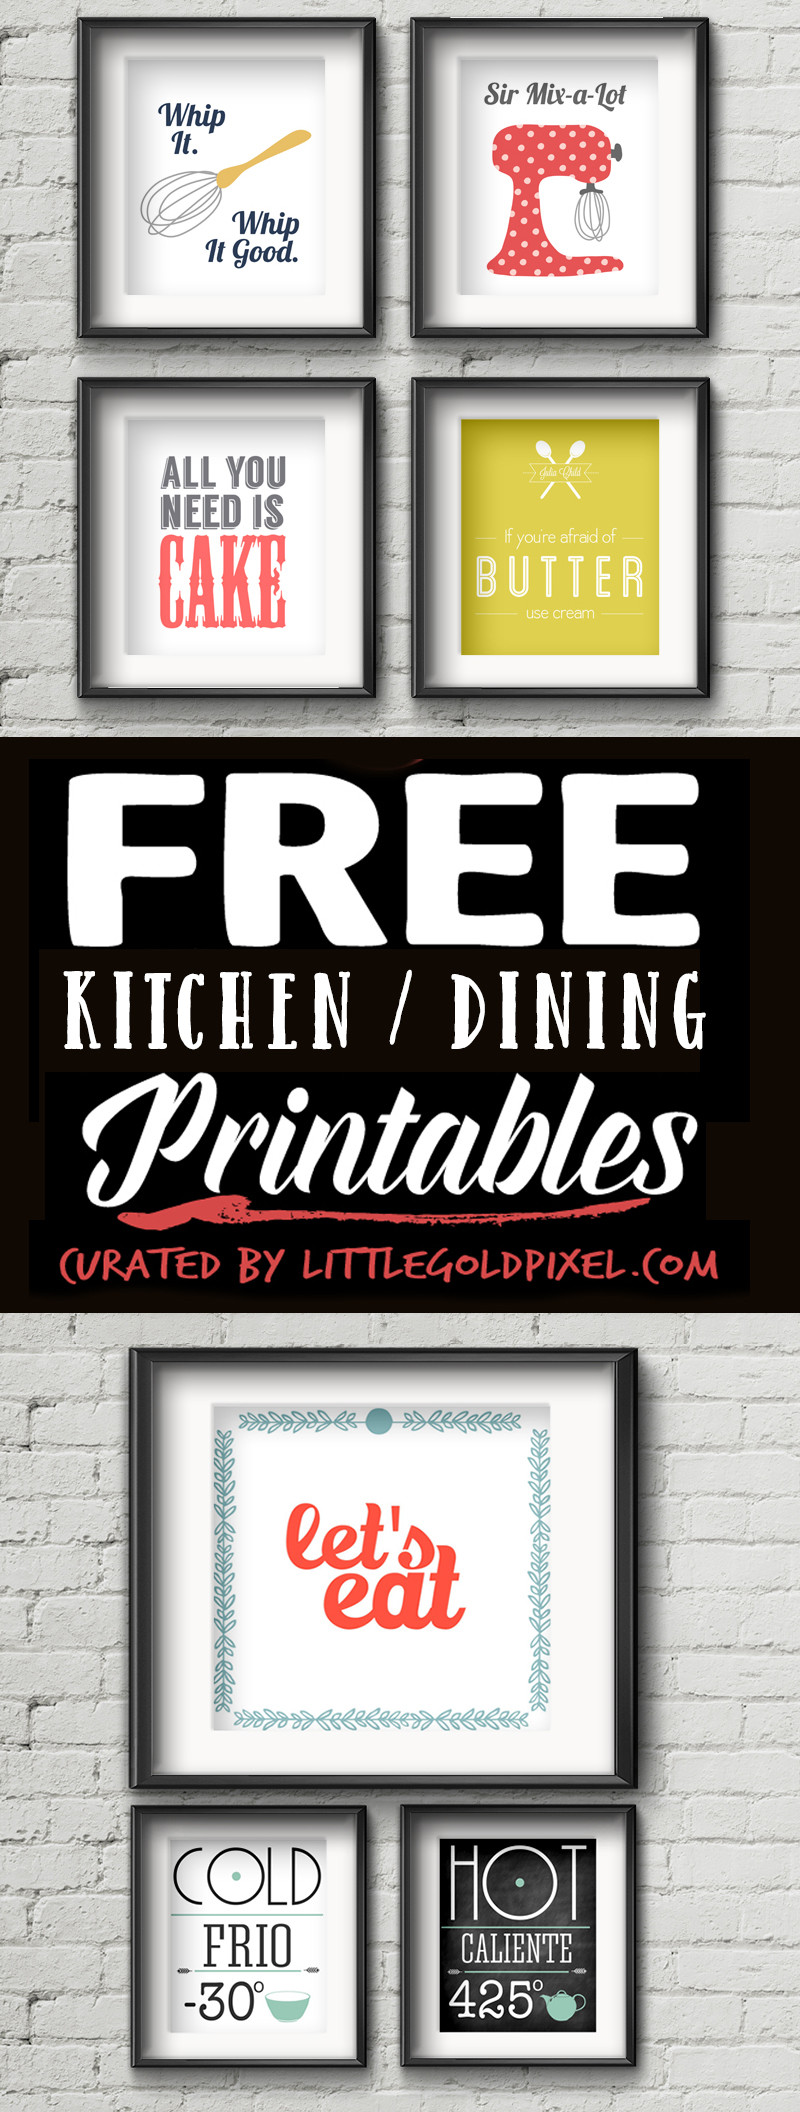 Wall Art For The Kitchen
 Free Printables Kitchen Wall Art • Little Gold Pixel